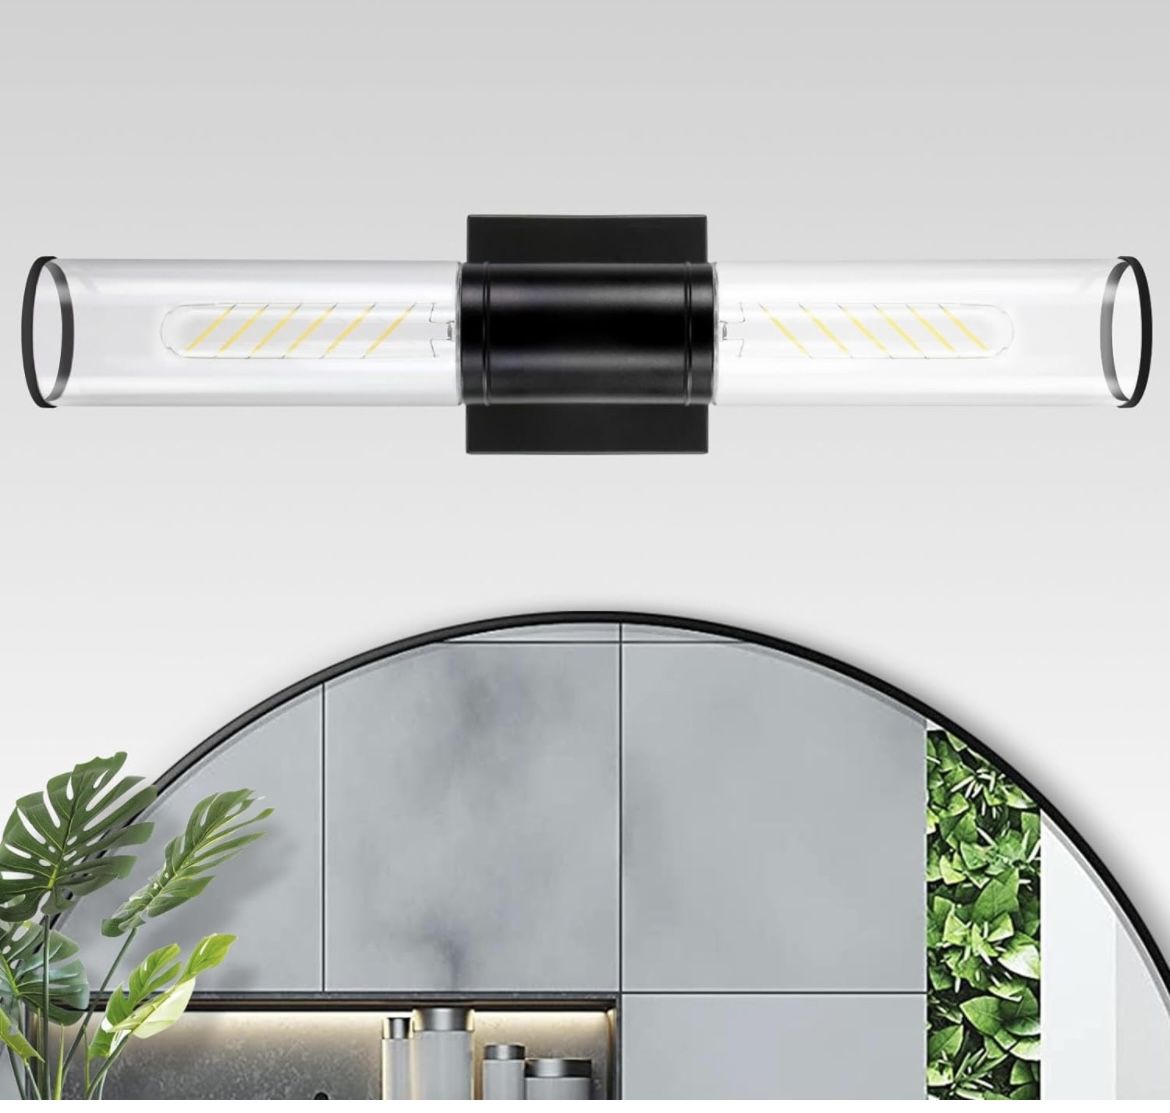 New In Box 2Light Bathroom Vanity Light Fixtures Over Mirror,Matte Black with Clear Glass Shade,Modern Wall Sconce for Bedroom,Living Room,Hallway,E26